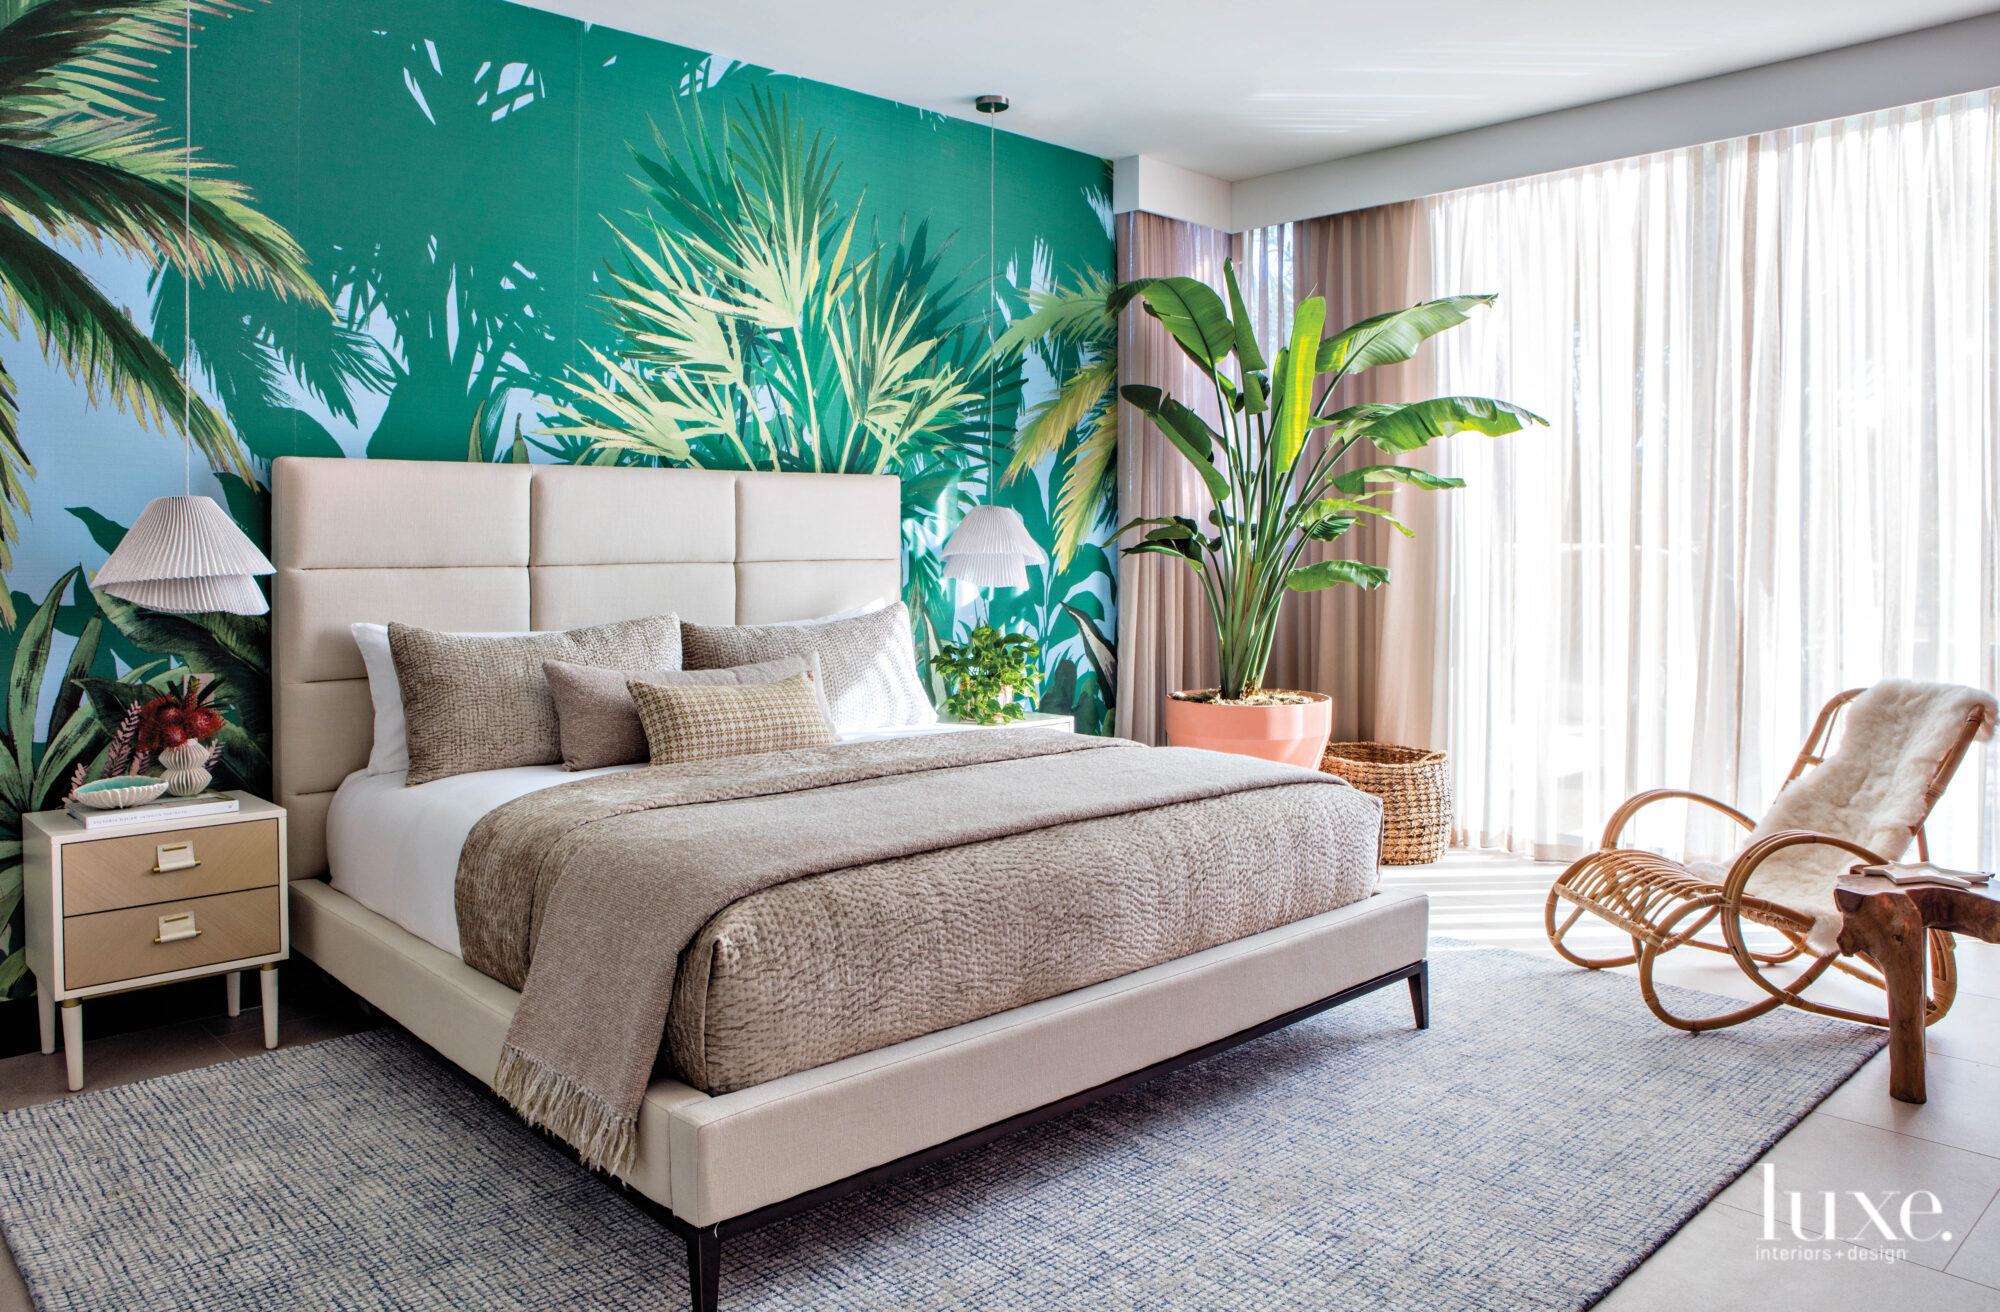 Guest bedroom with a bright green wallcovering with palm tree pattern.